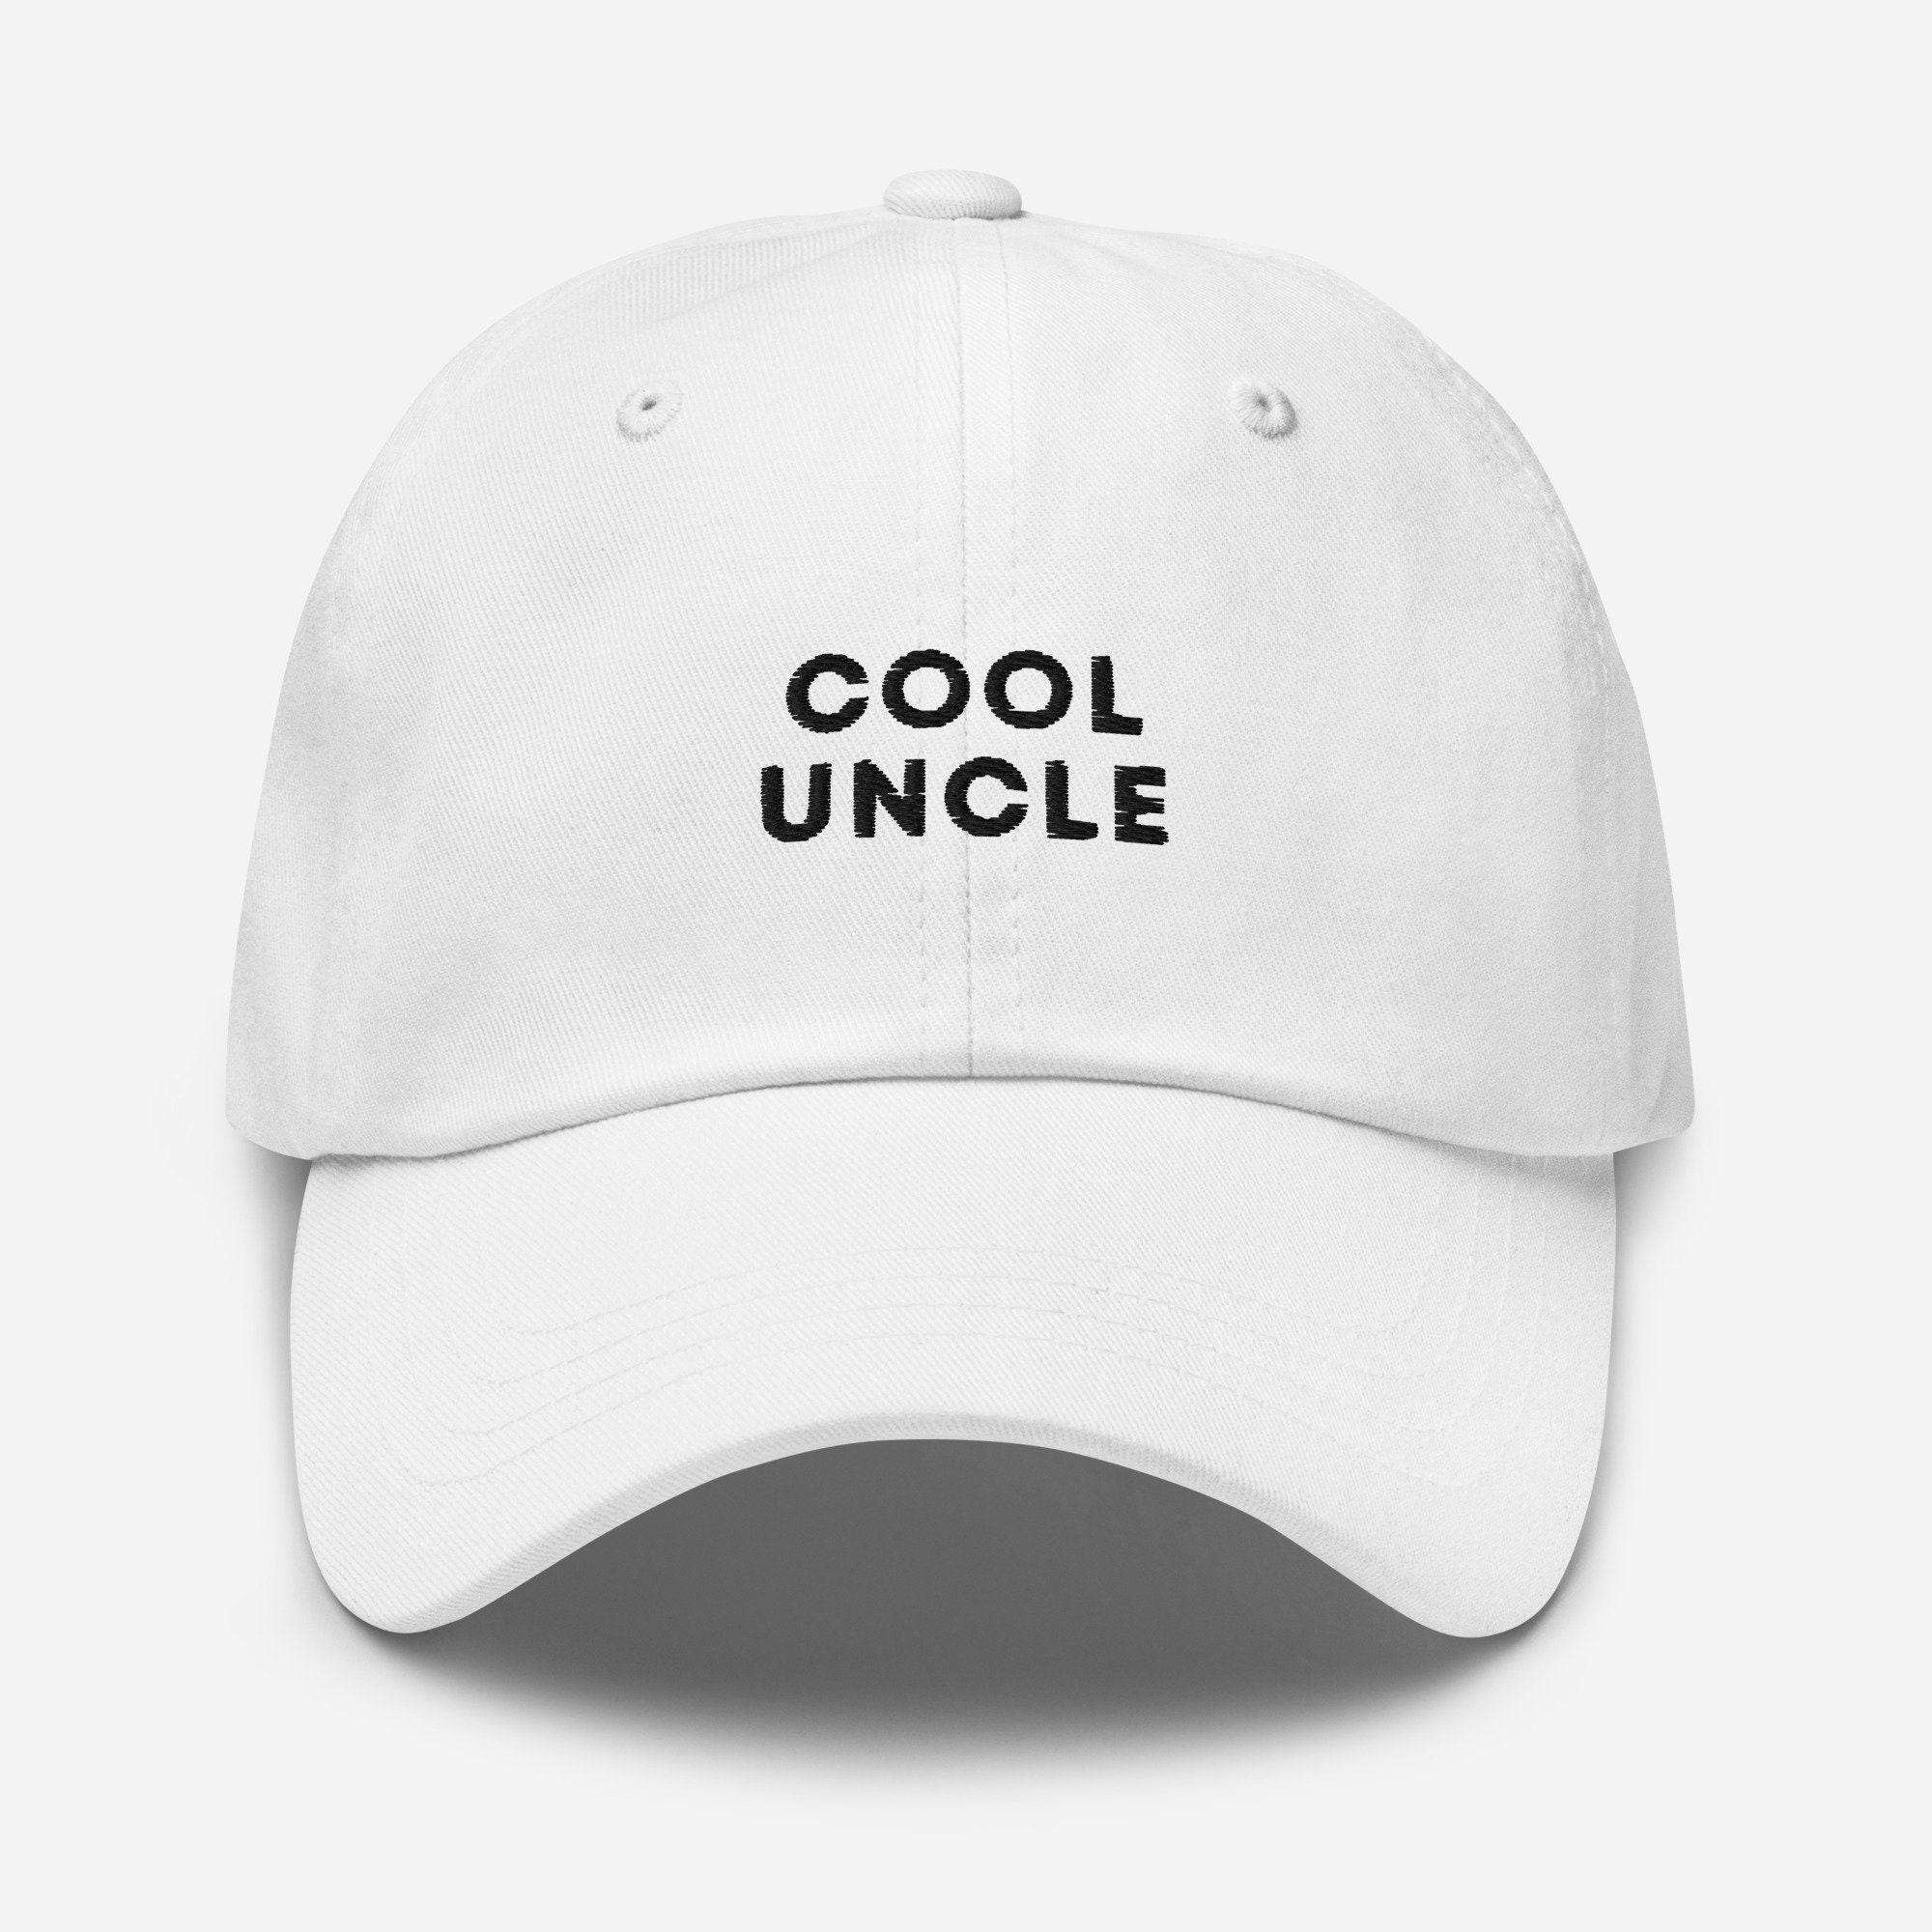 Embroidered Cool Uncle Hat, Funny New Uncle Gift, Cool Uncle Cap, Cool Uncle Hat, Cool Uncle Gift, New Uncle Gift